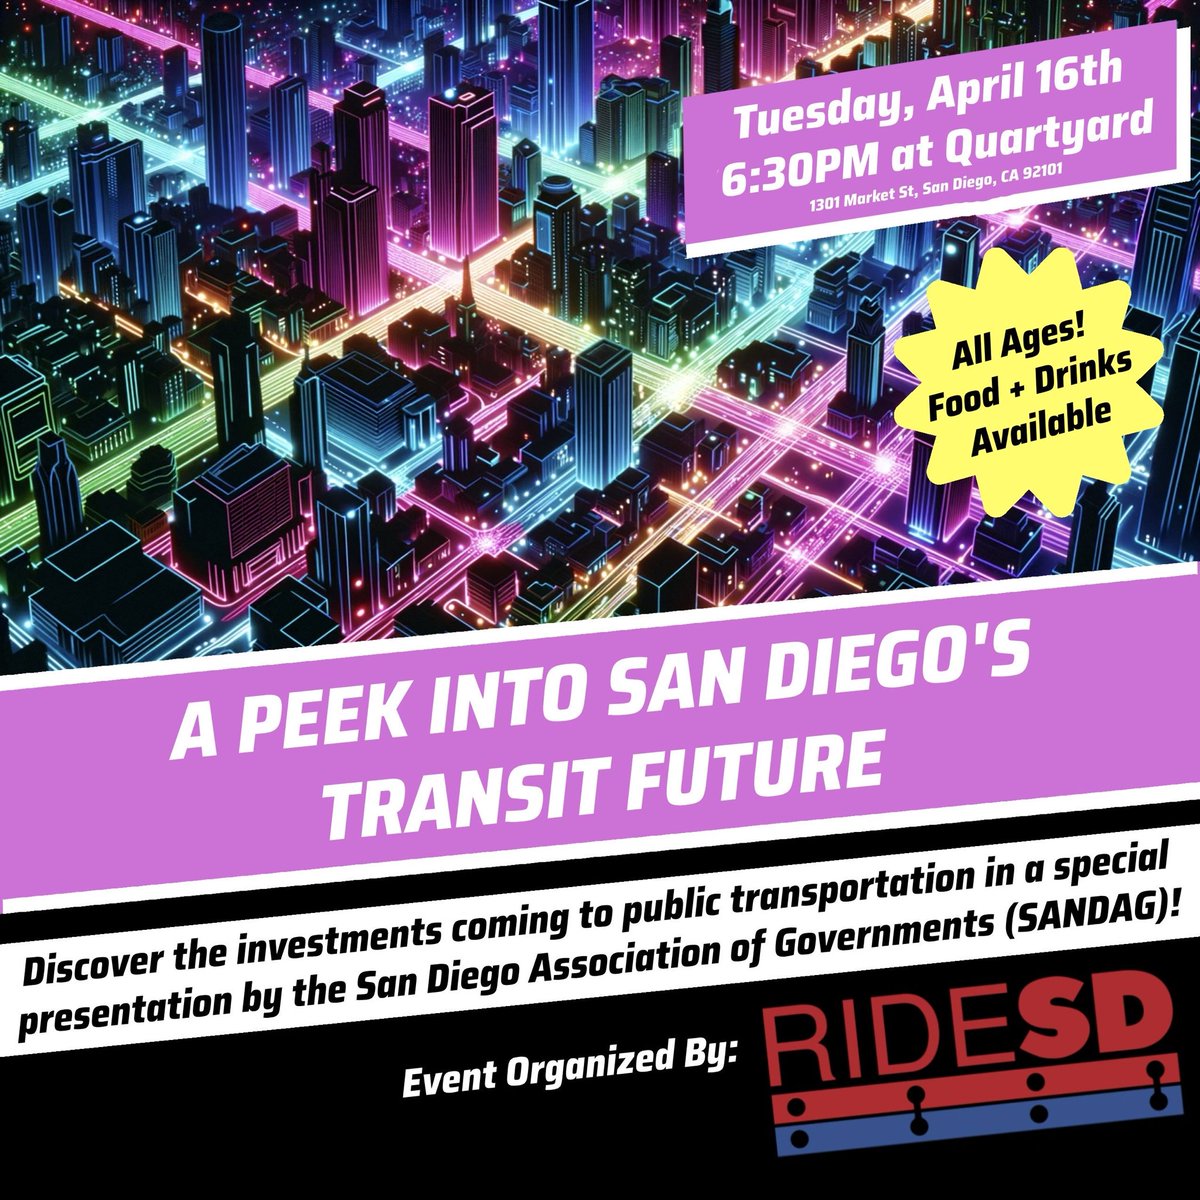 THIS TUESDAY! Join transit fans and advocates for a presentation by @sandagregion about the 2025 Regional Plan for transportation in San Diego County🚌🚊🛣️🚲